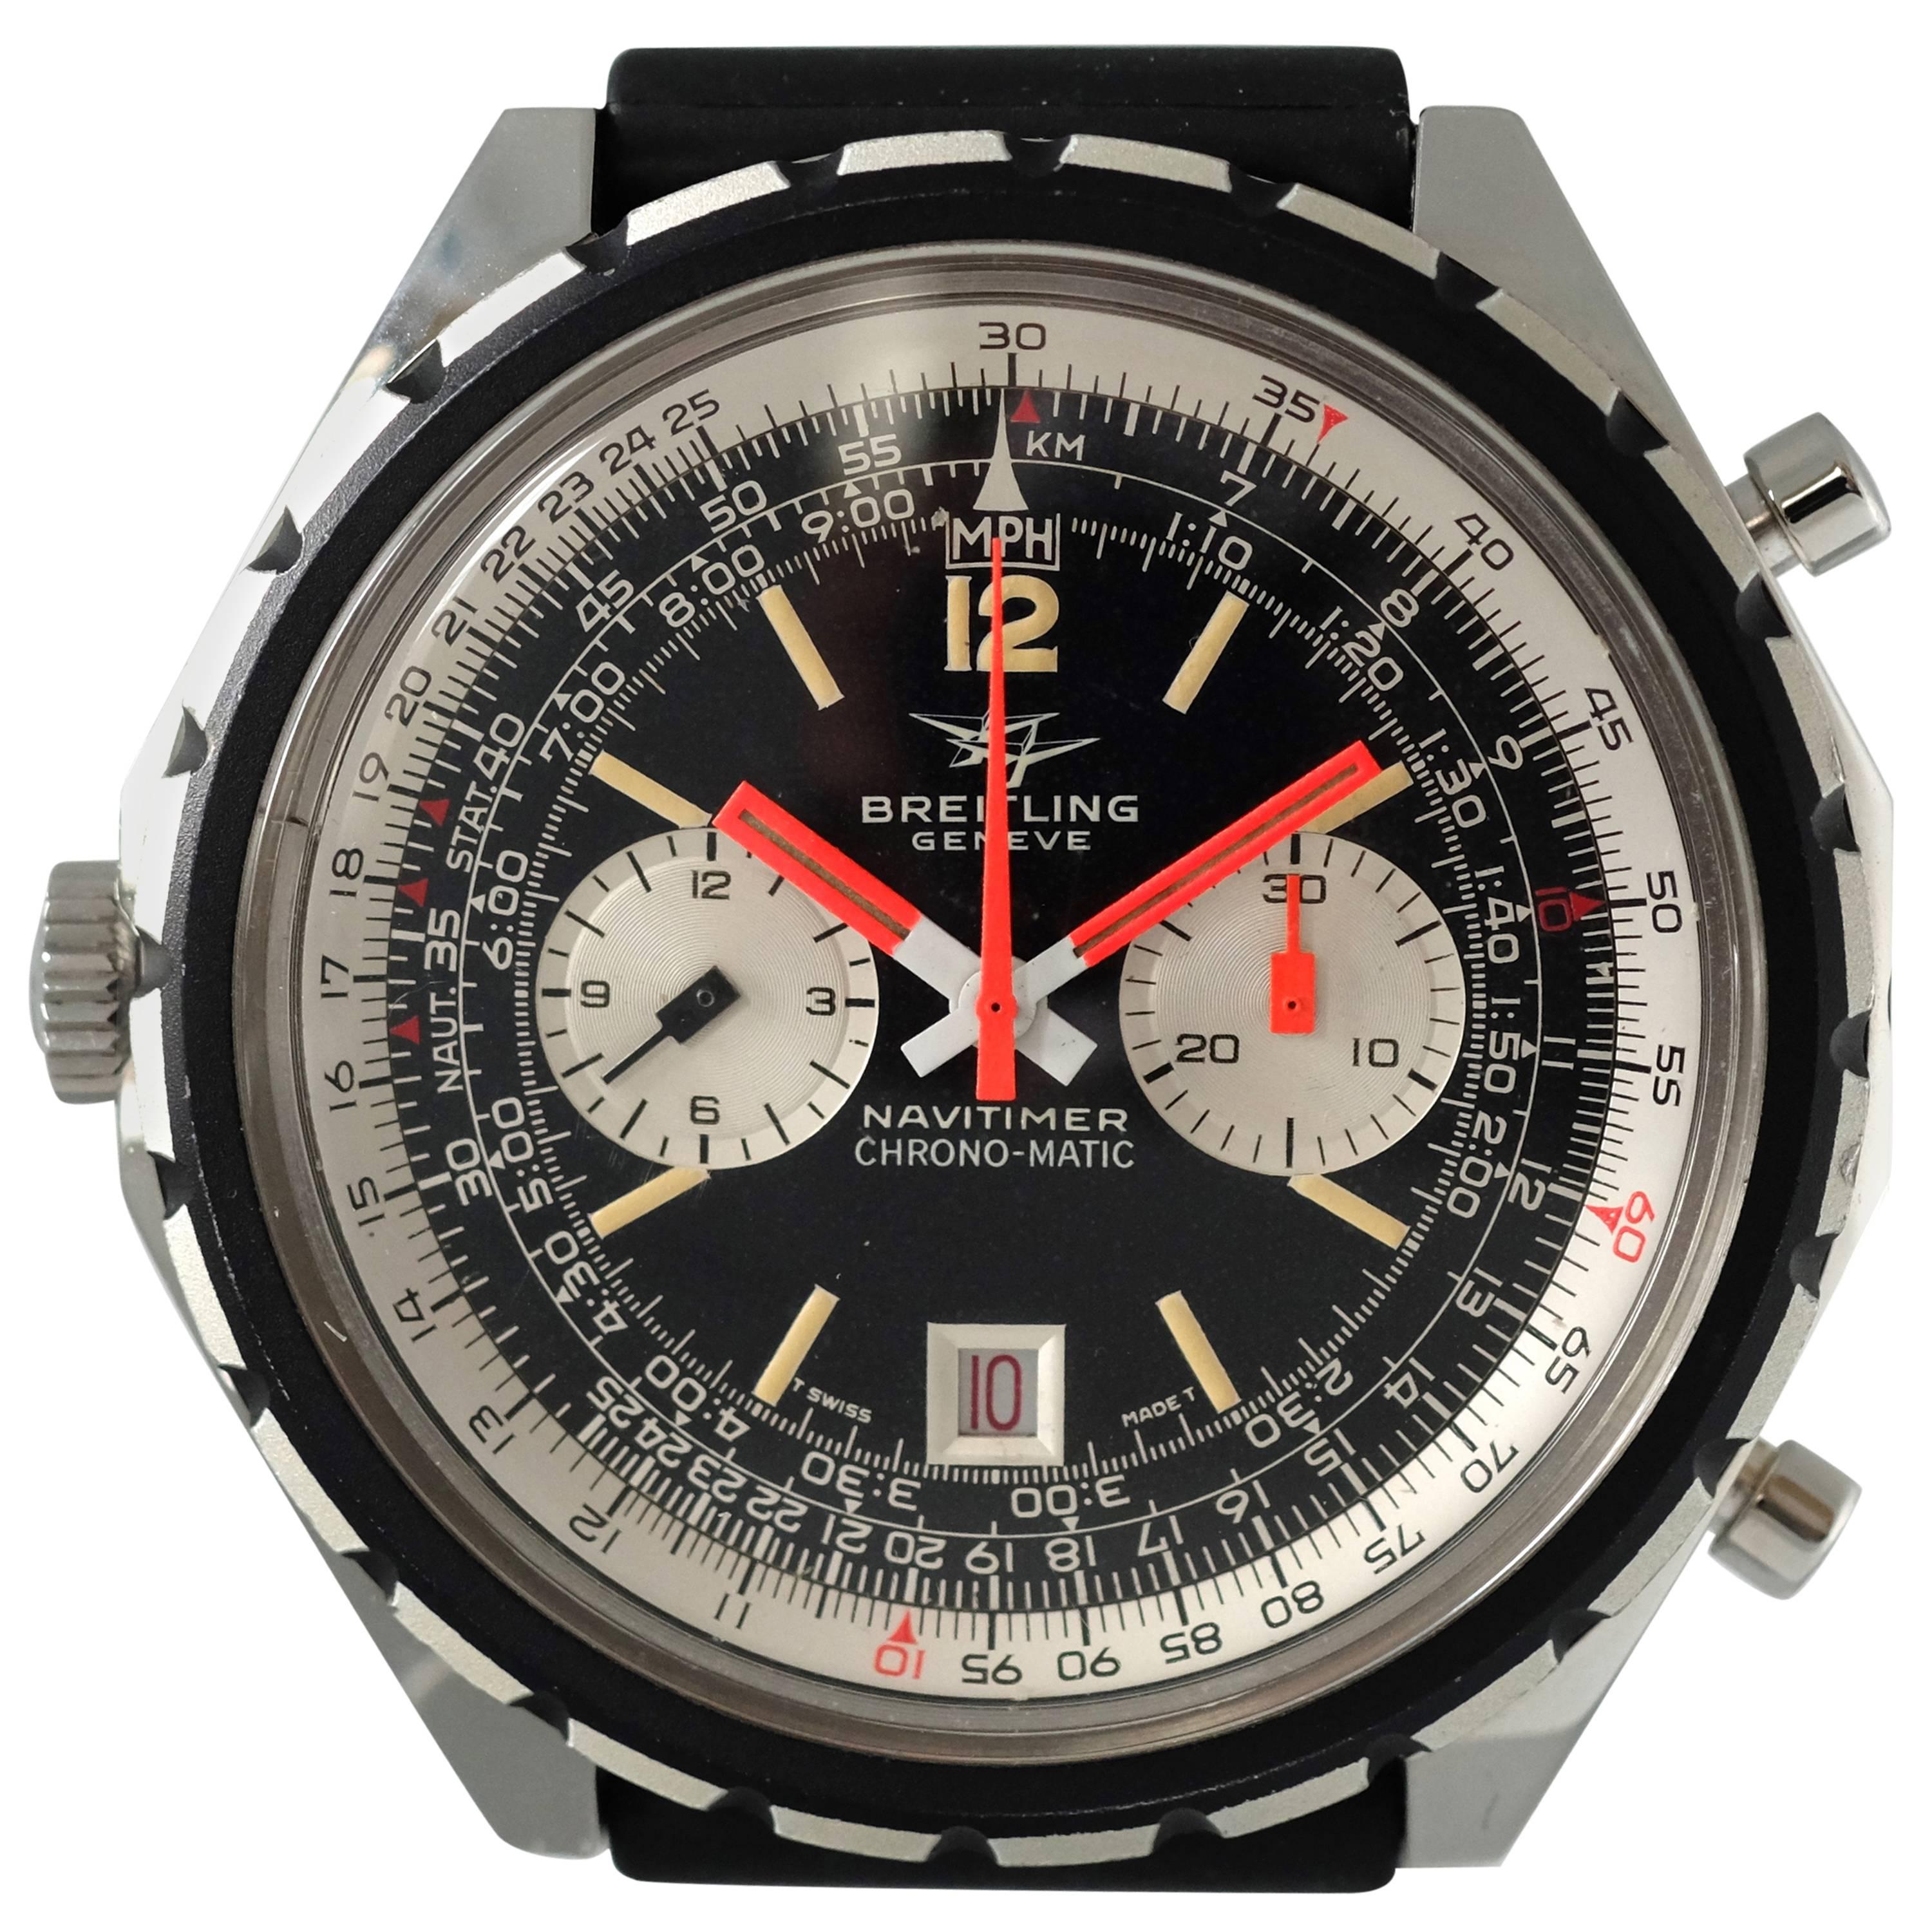 Breitling Stainless Steel Navitimer Chrono-Matic Automatic Wristwatch Ref 1806 For Sale